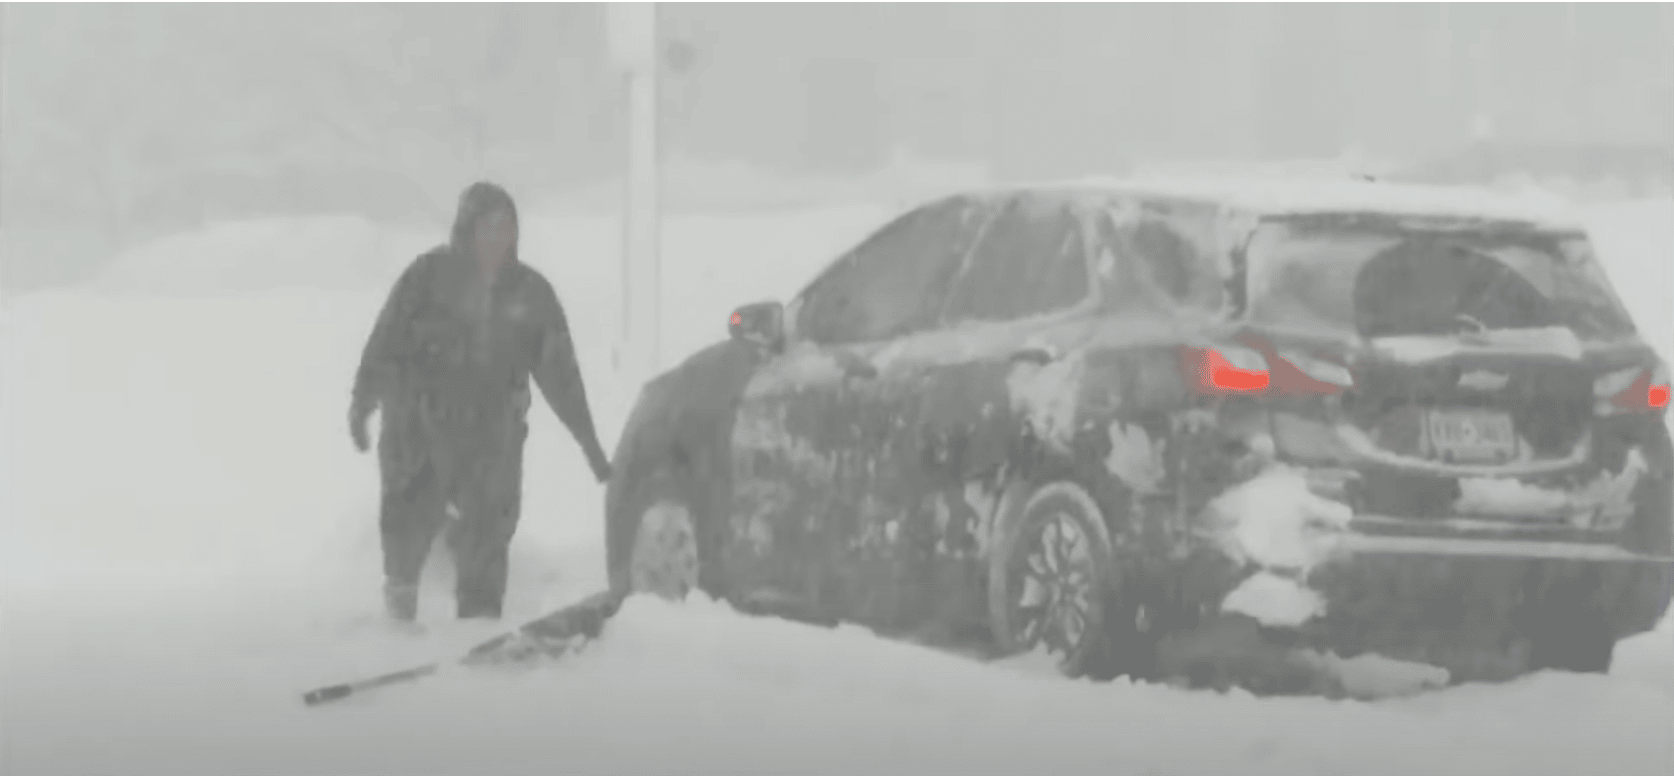 (WATCH) Historic snow storm buries Western, NY with 6 feet of snow leaving at least two dead and it’s still snowing